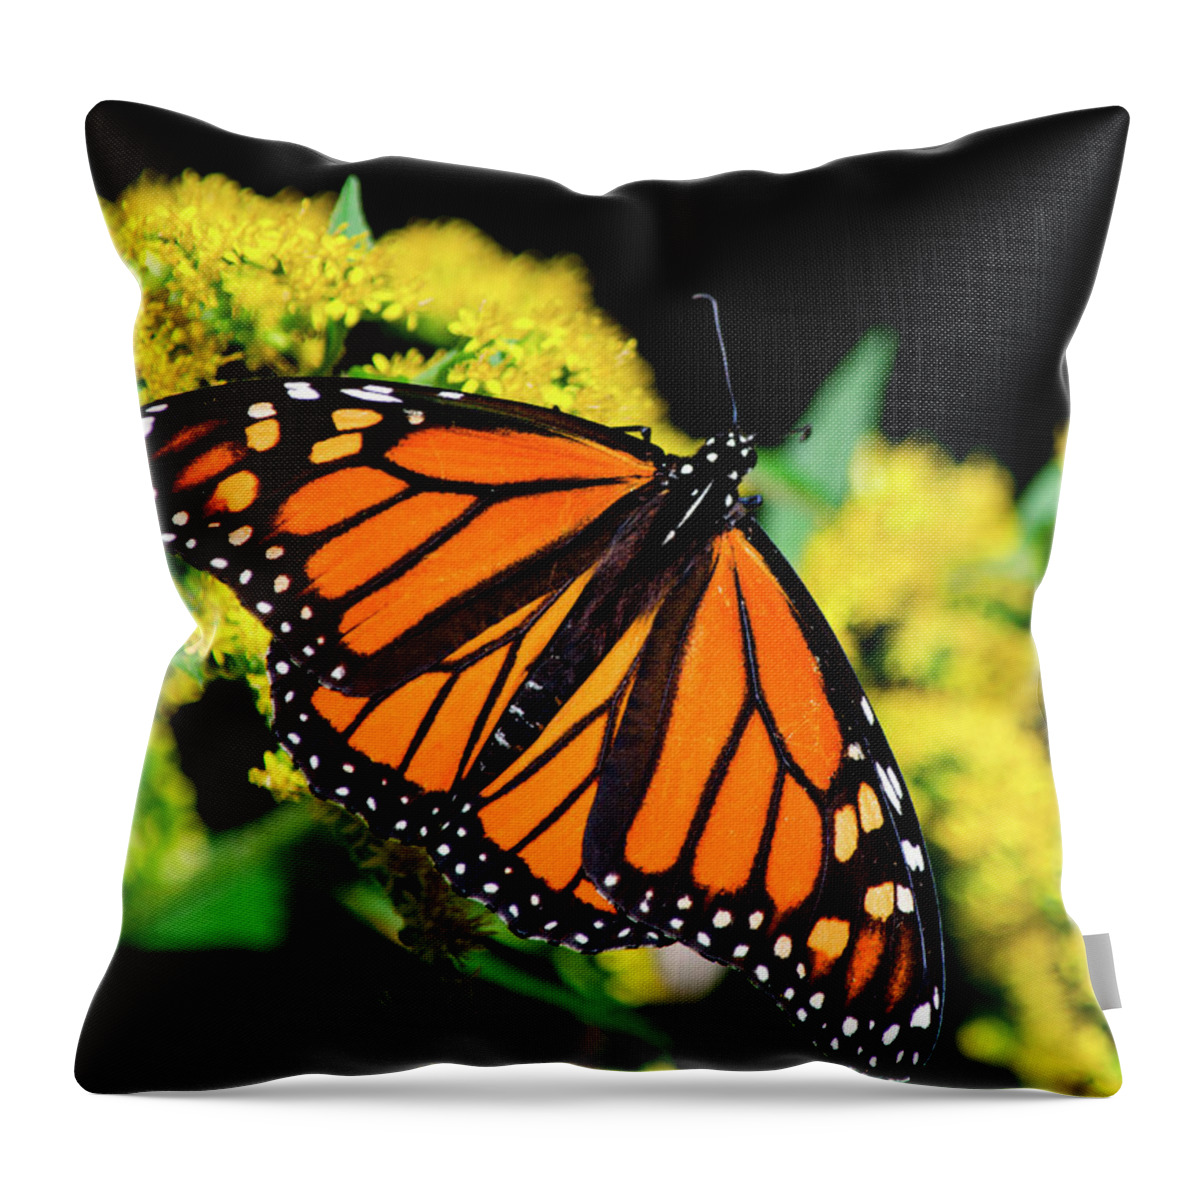 Monarch Butterfly Throw Pillow featuring the photograph Orange Monarch Butterfly by Christina Rollo